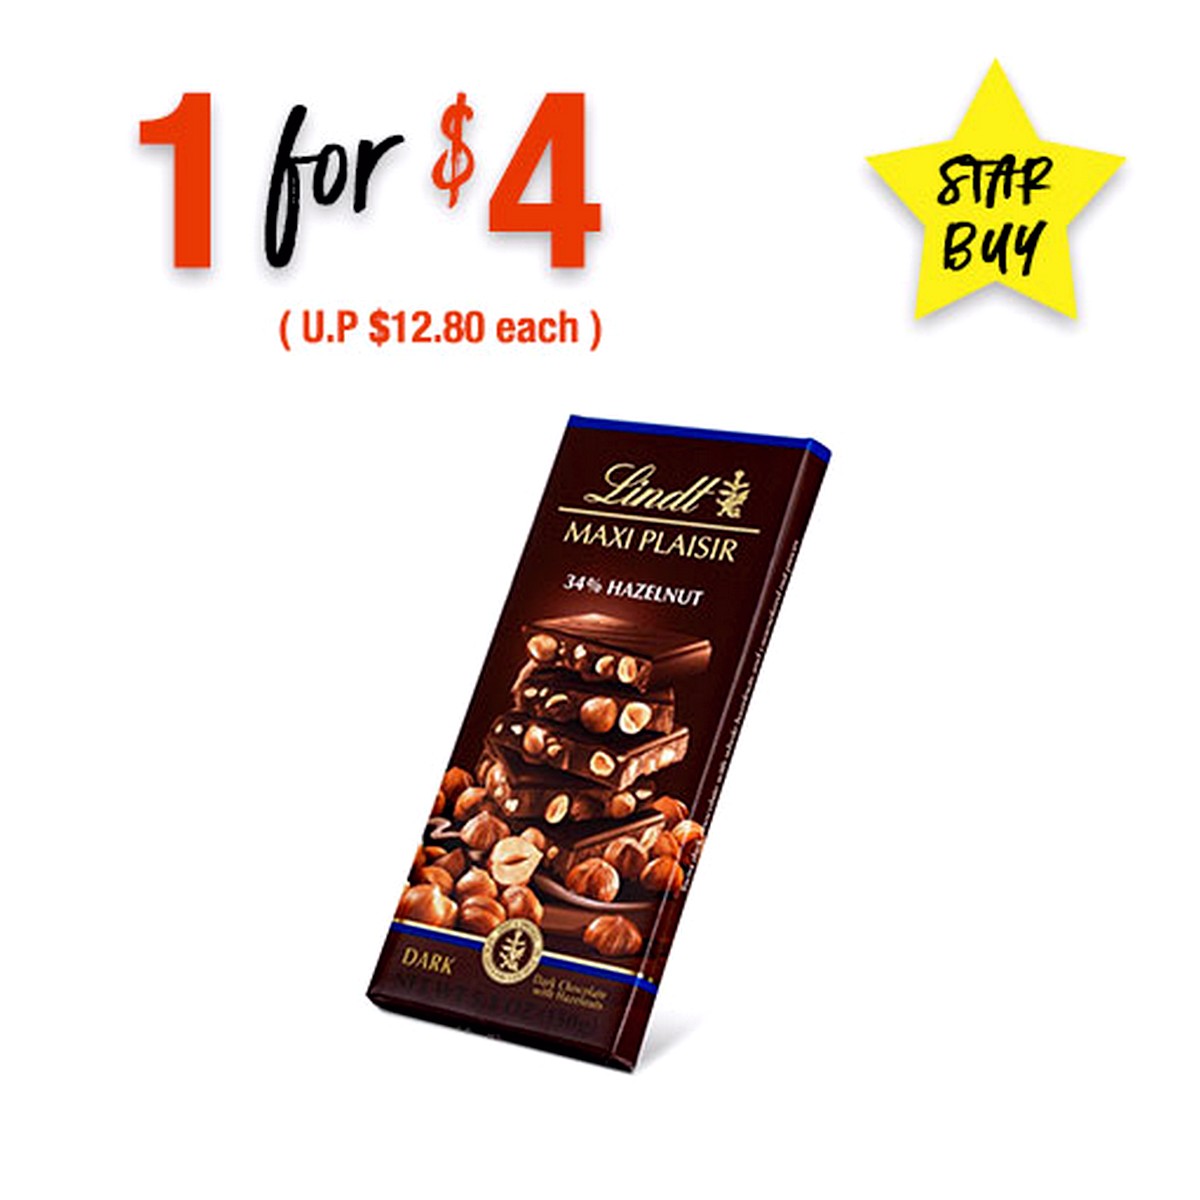 15-4379971_sb_1 8 Apr-31 May 2020: The Cocoa Trees Online Mega Sale! Up to 80% off Chocolates & Snacks!